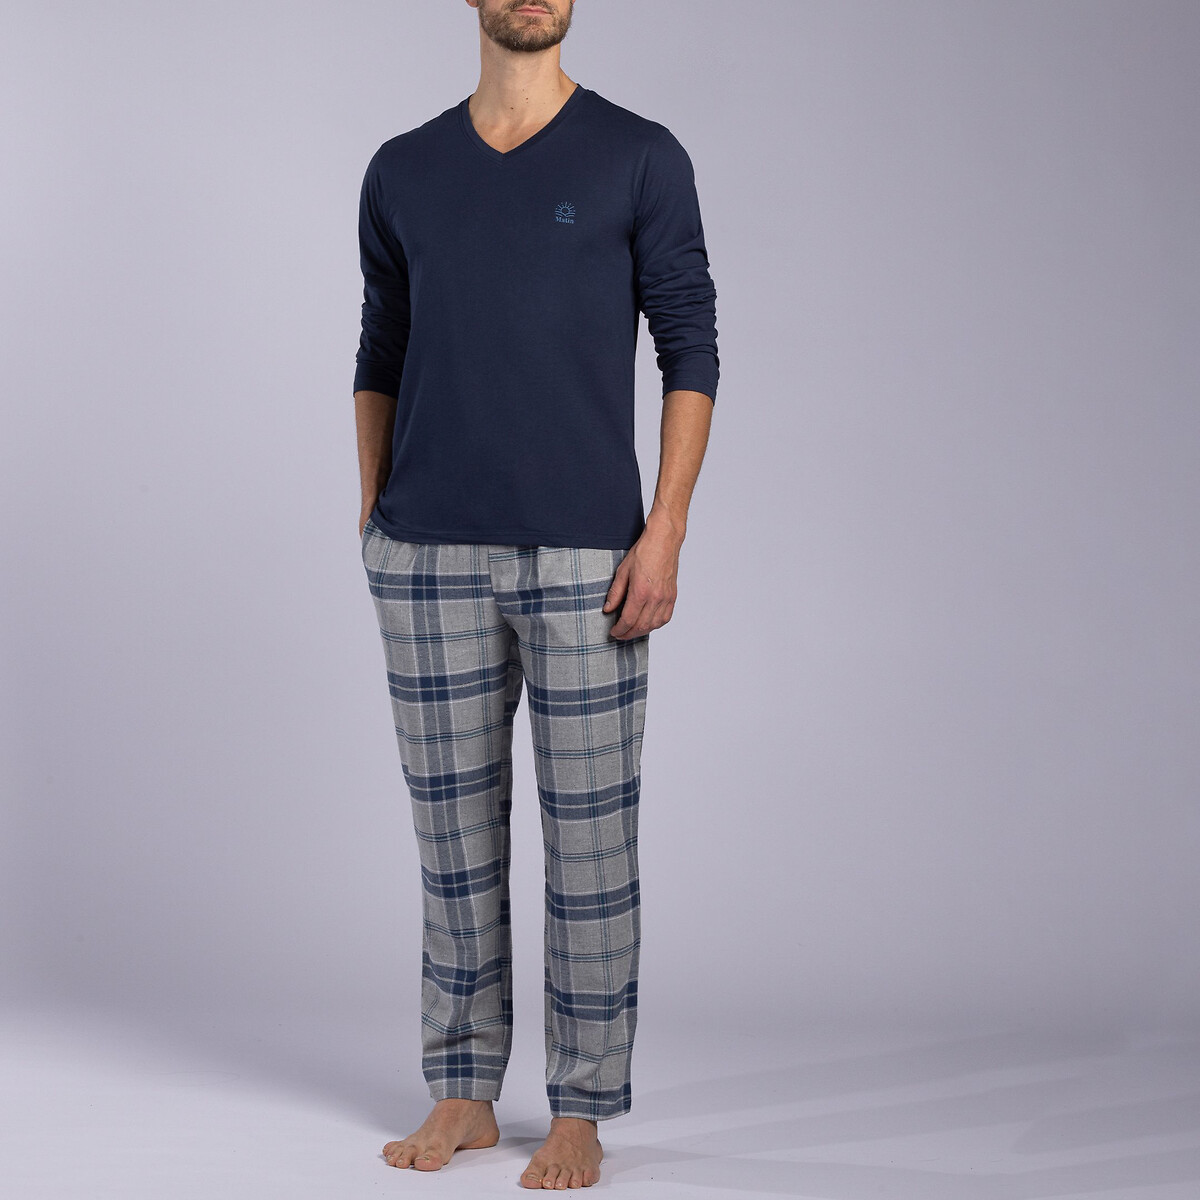 cotton v-neck pyjamas with long sleeves